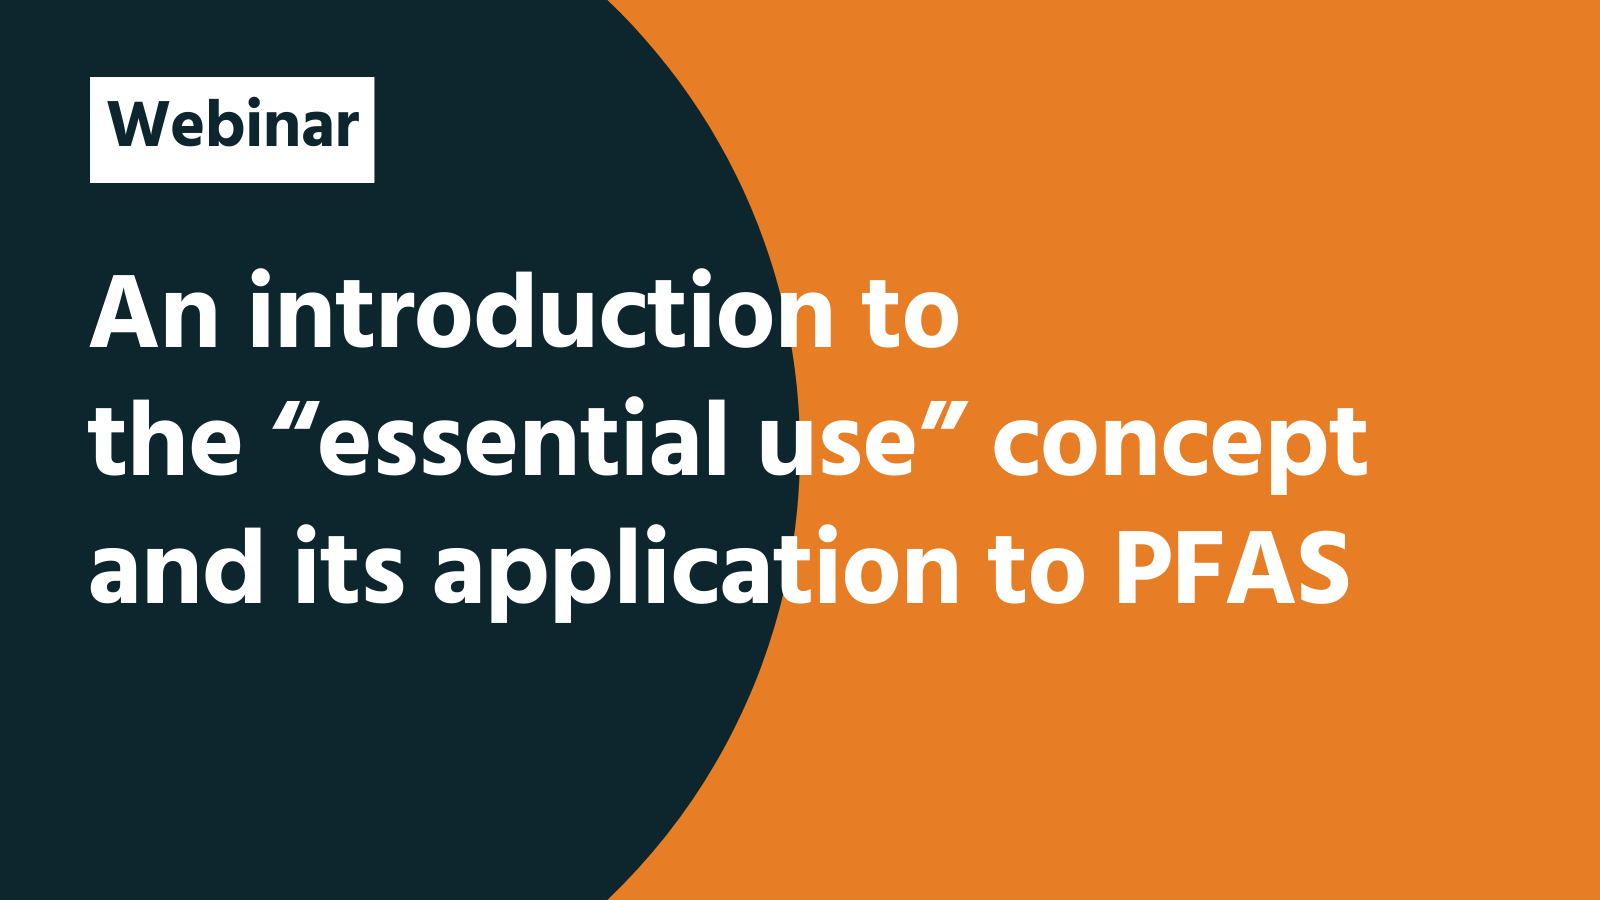 Webinar: An introduction to the “essential use” concept and its application to PFAS